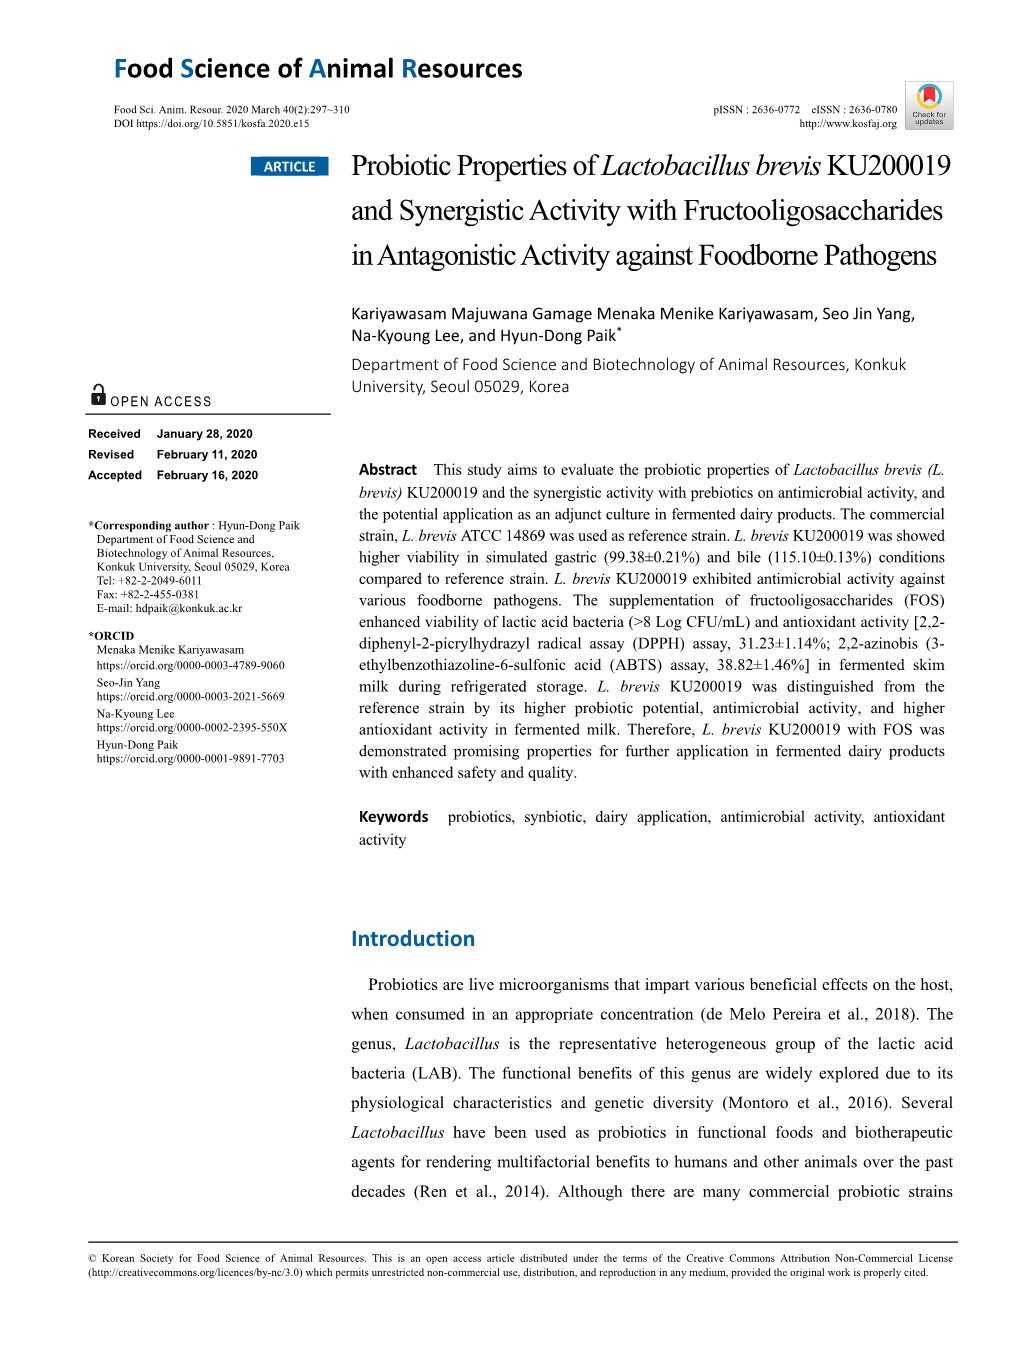 Probiotic Properties of Lactobacillus Brevisku200019 and Synergistic Activity with Fructooligosaccharides in Antagonistic Activi